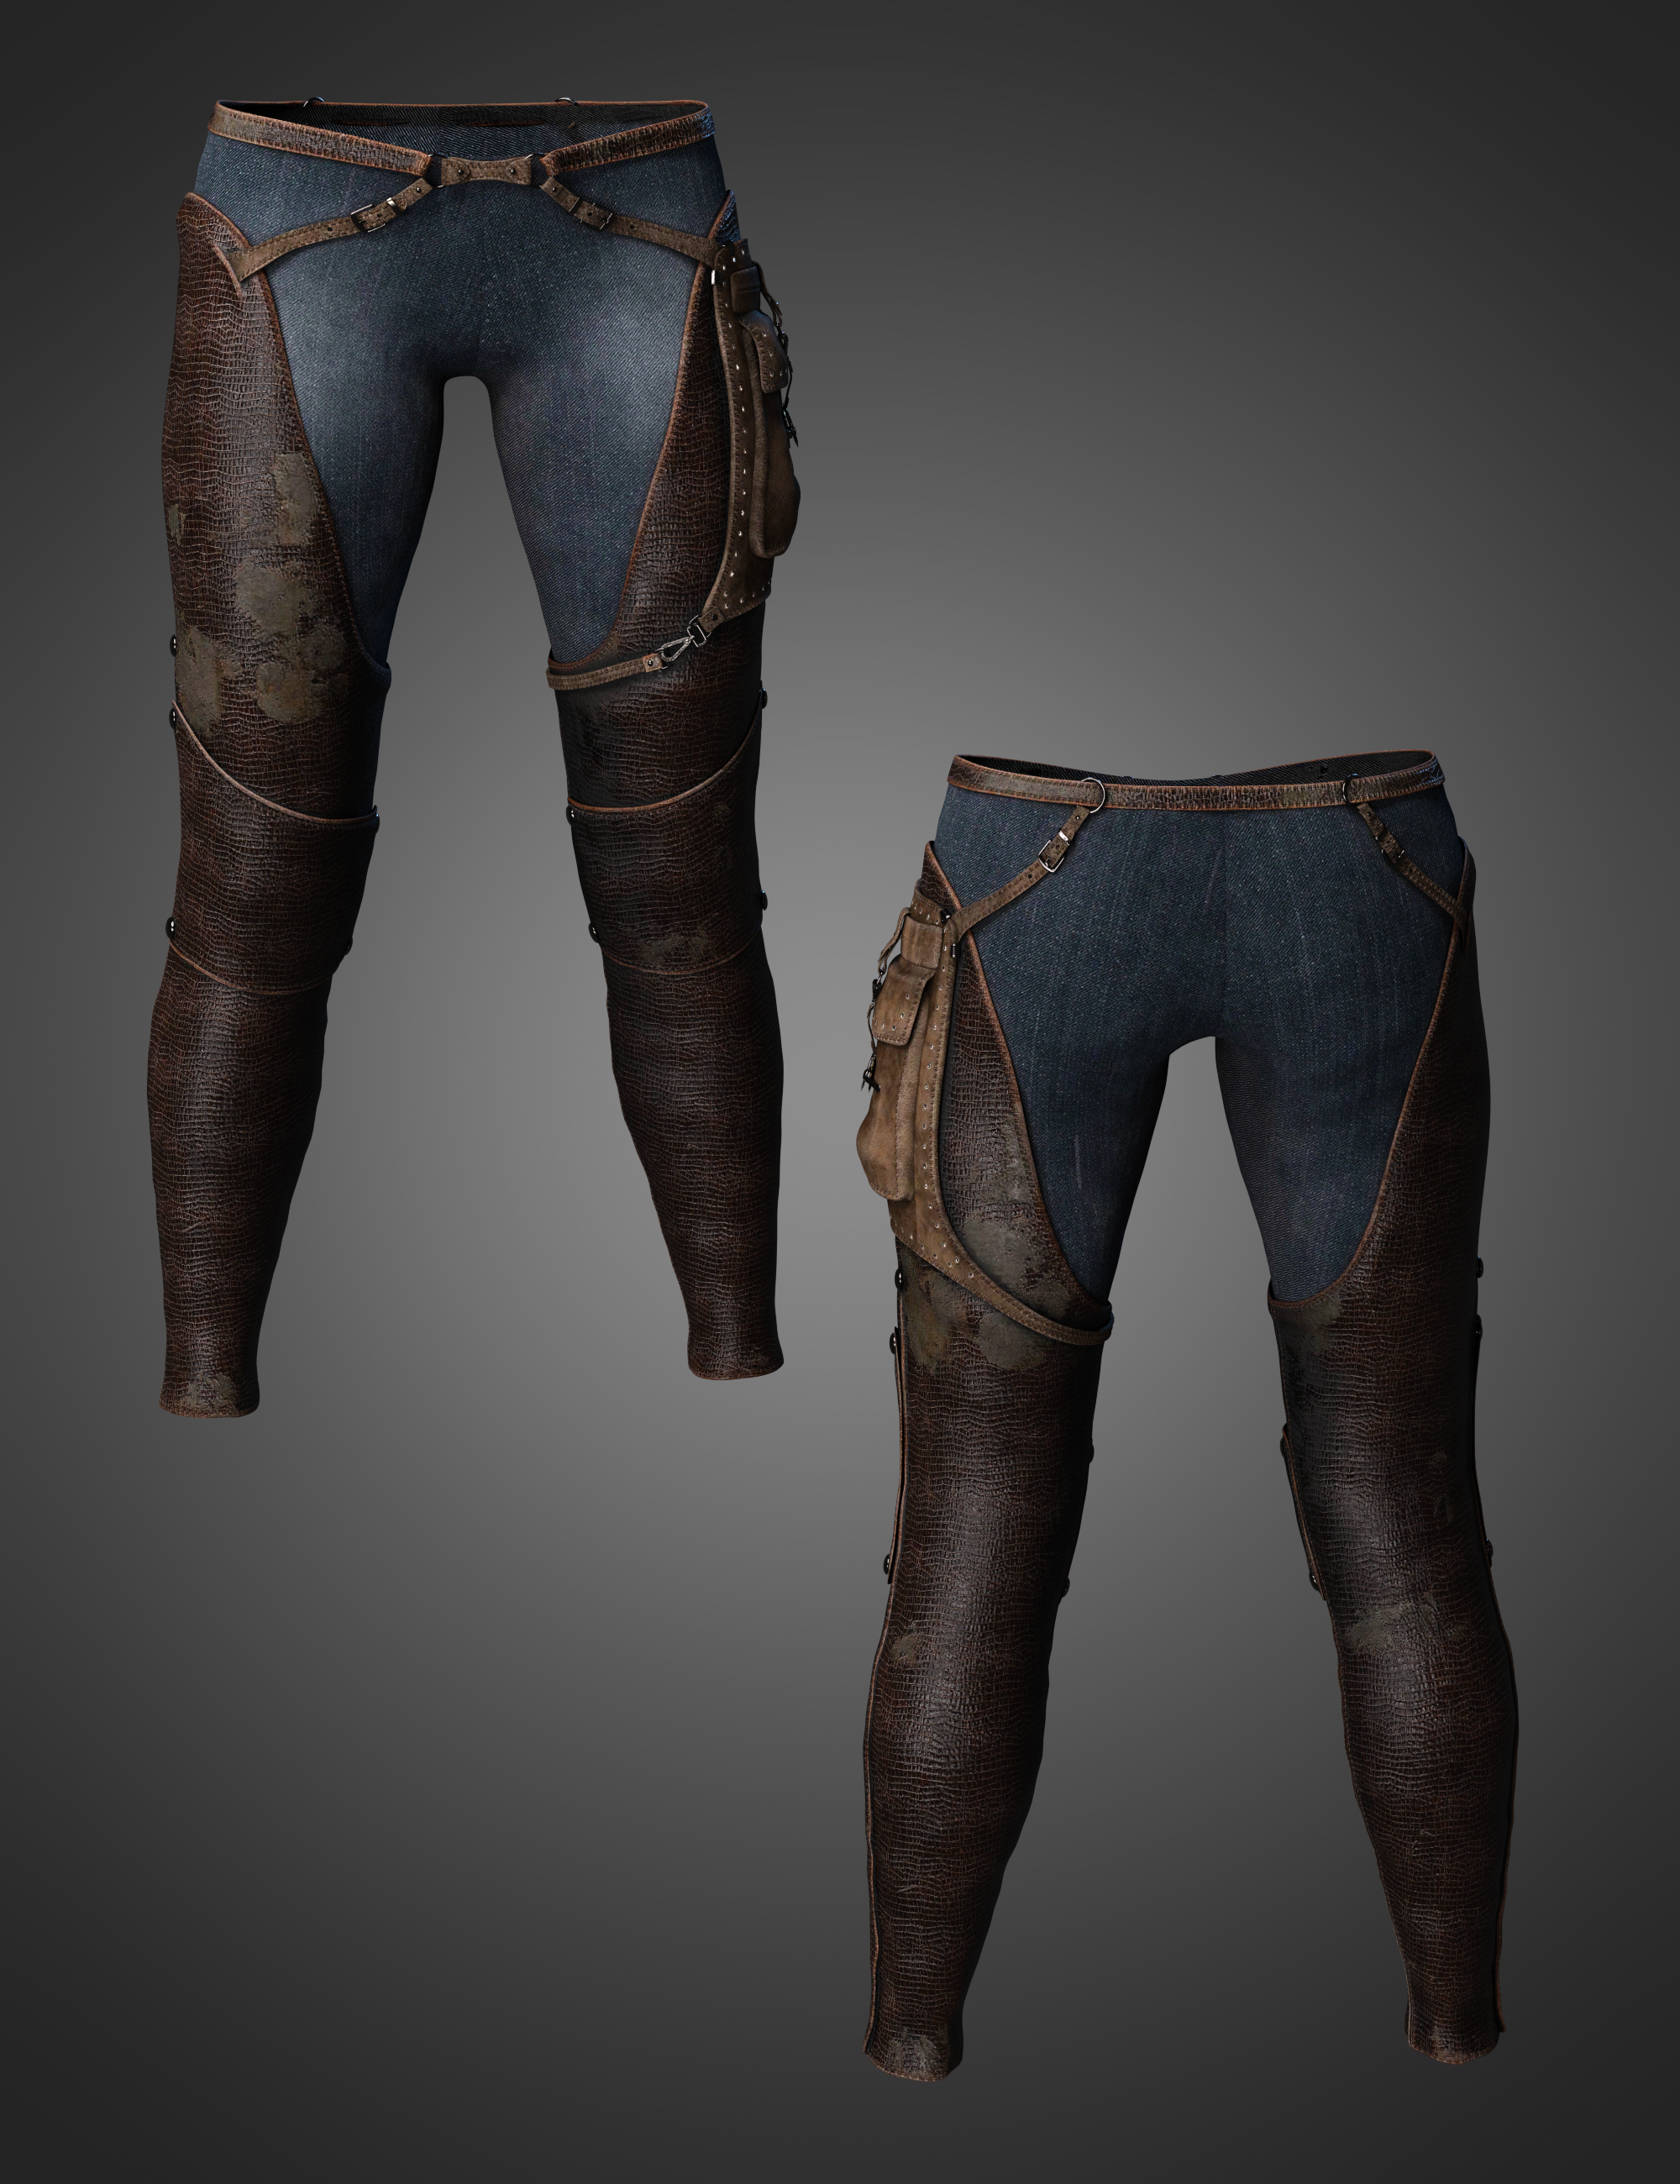 Halcyon Fragment Pants for Genesis 8 and 8.1 Females